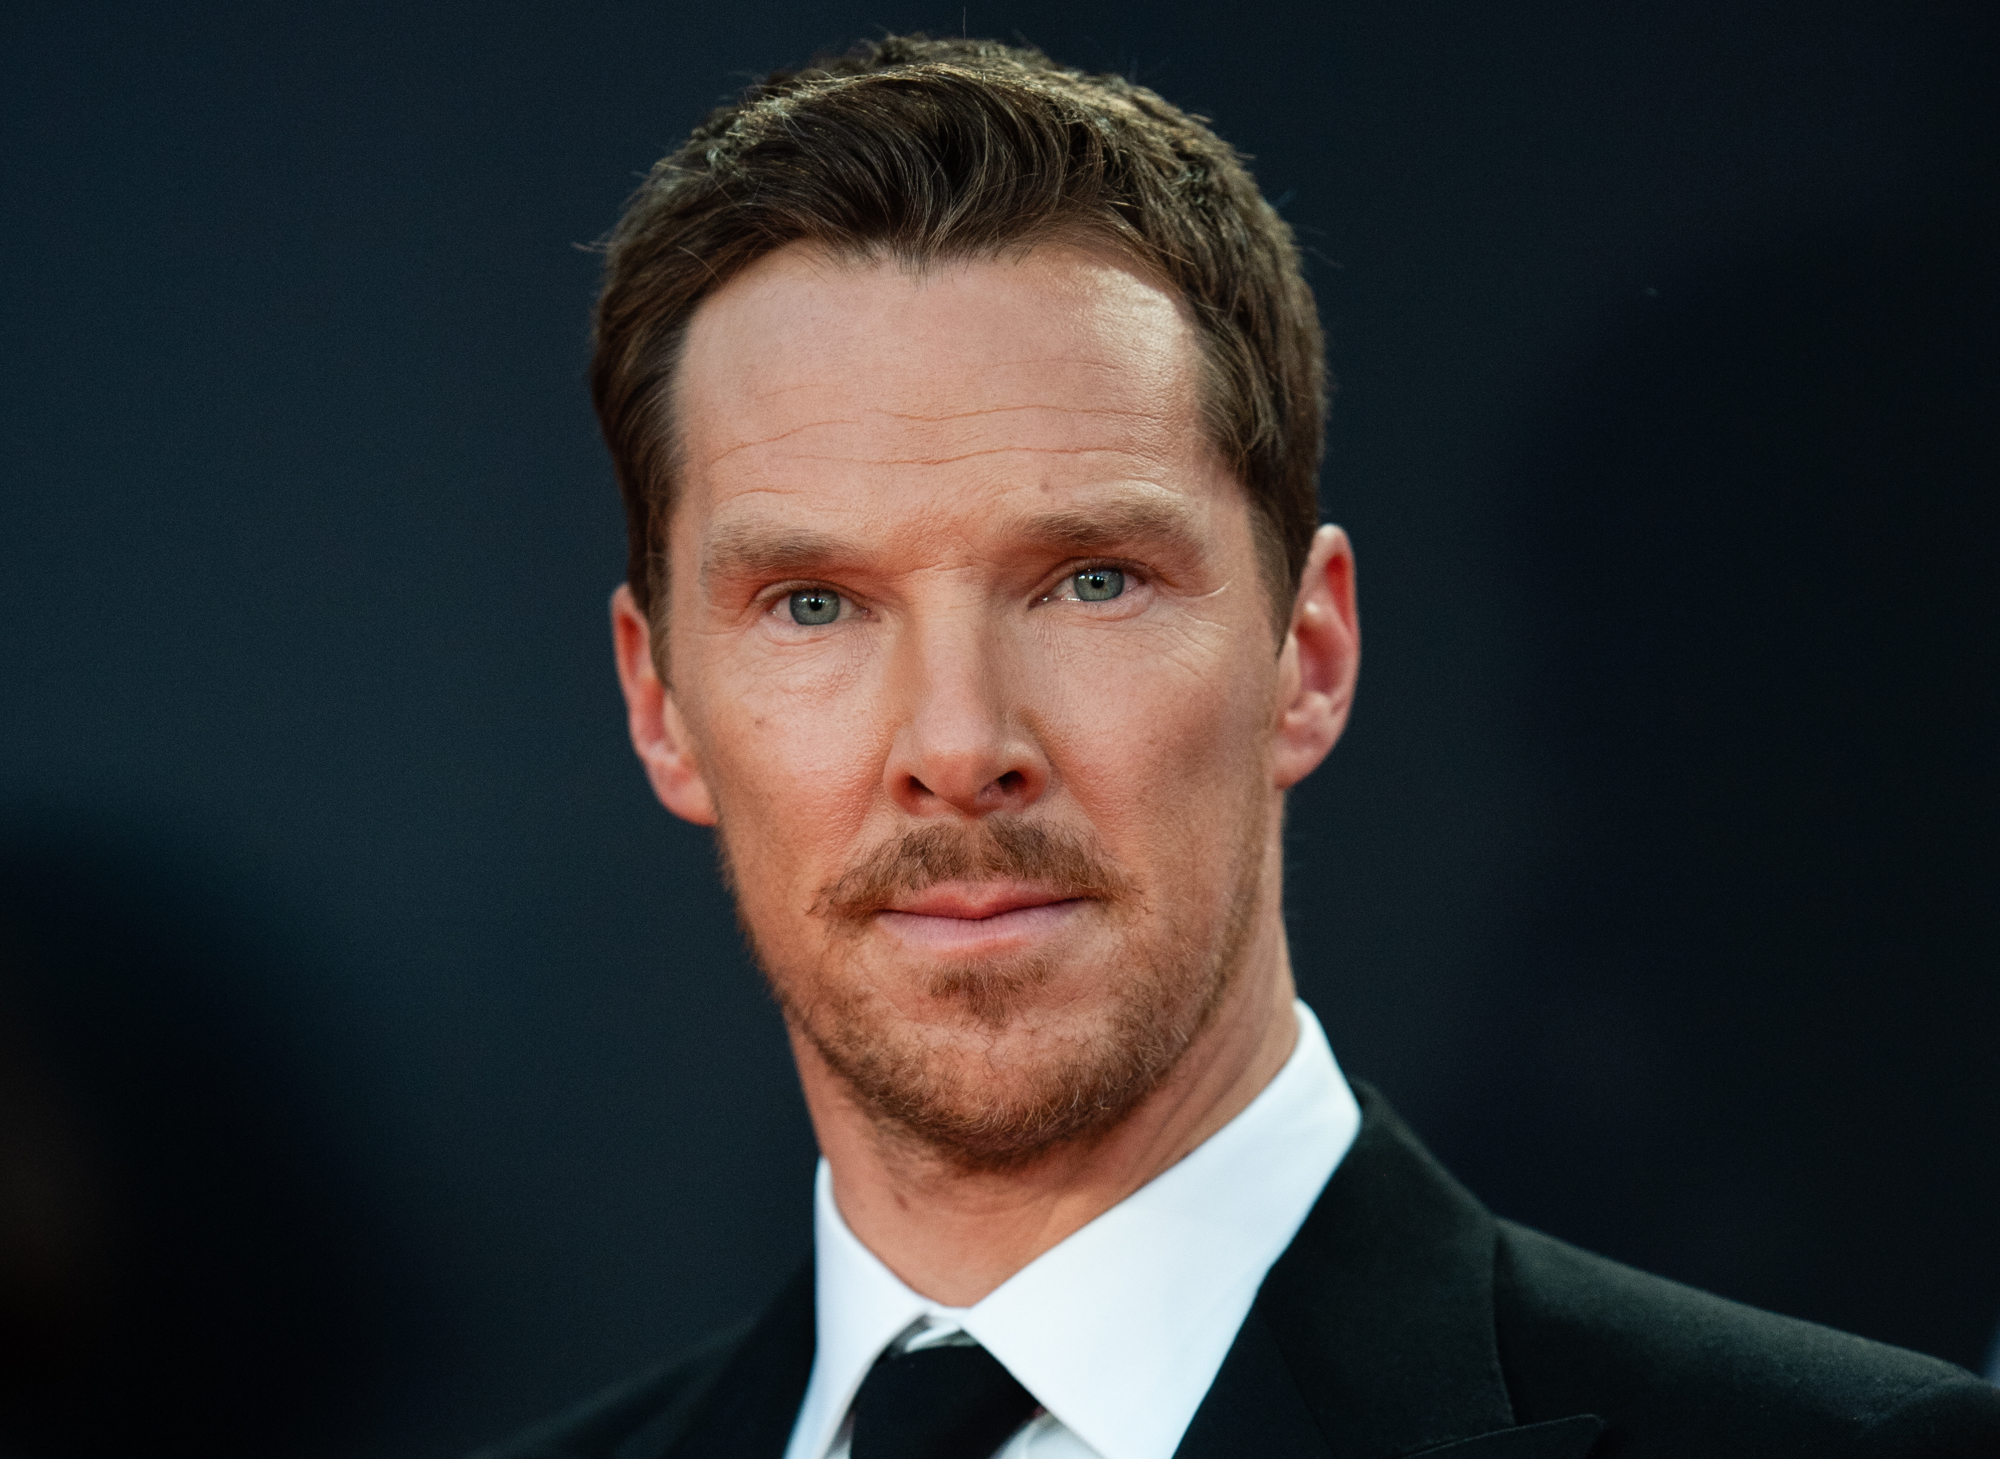 Benedict Cumberbatch wearing a suit attending an event